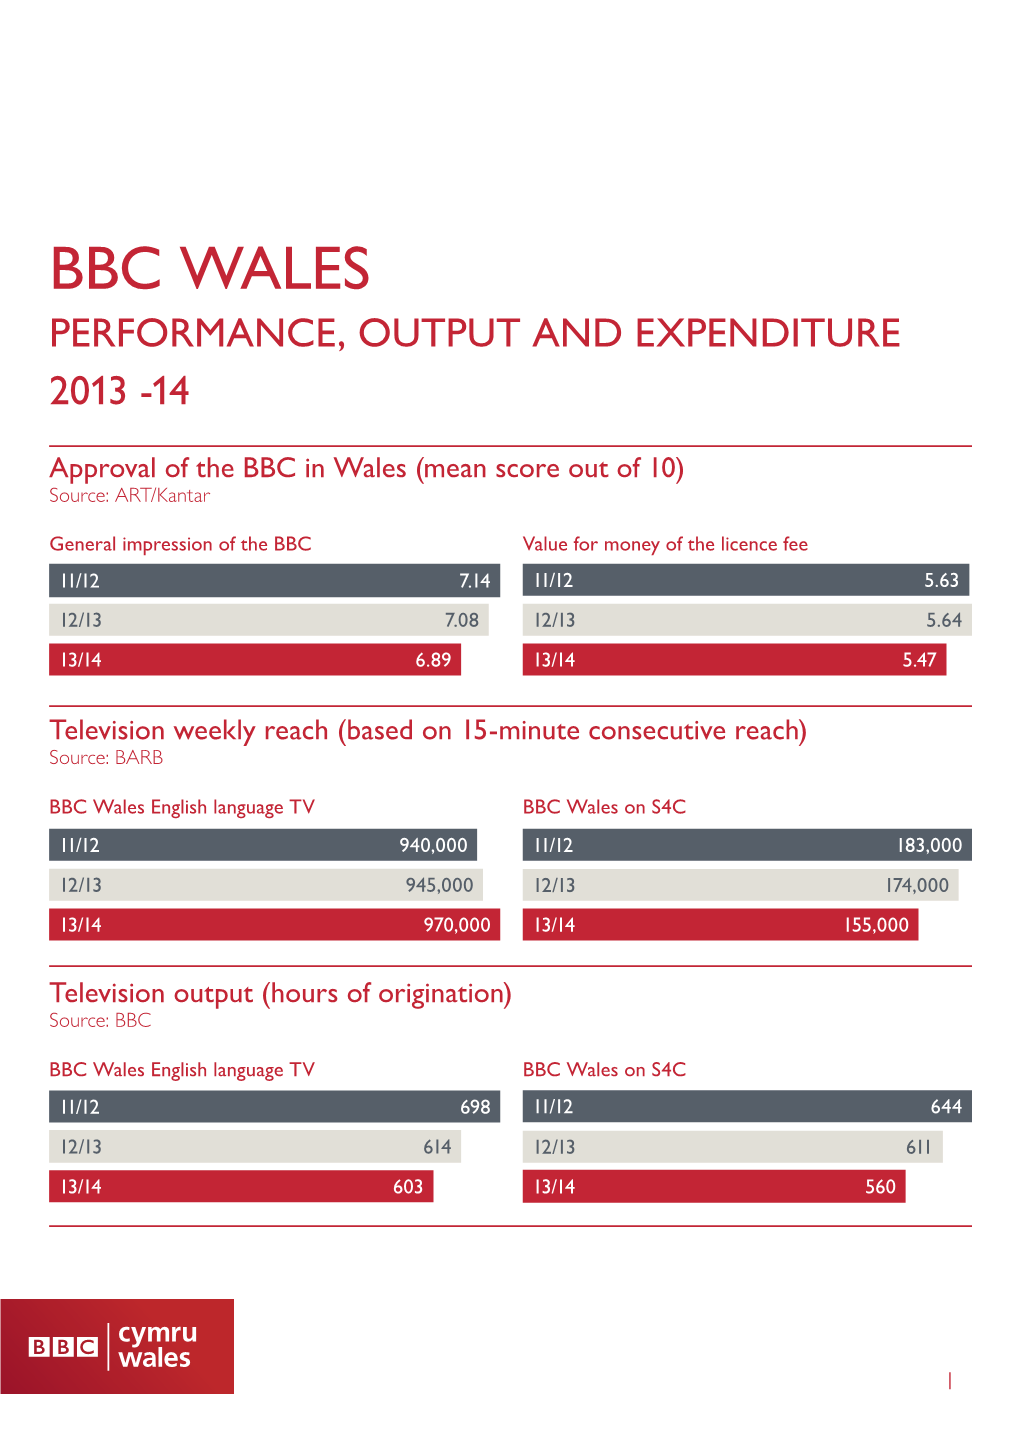 Bbc Wales Performance, Output and Expenditure 2013 -14